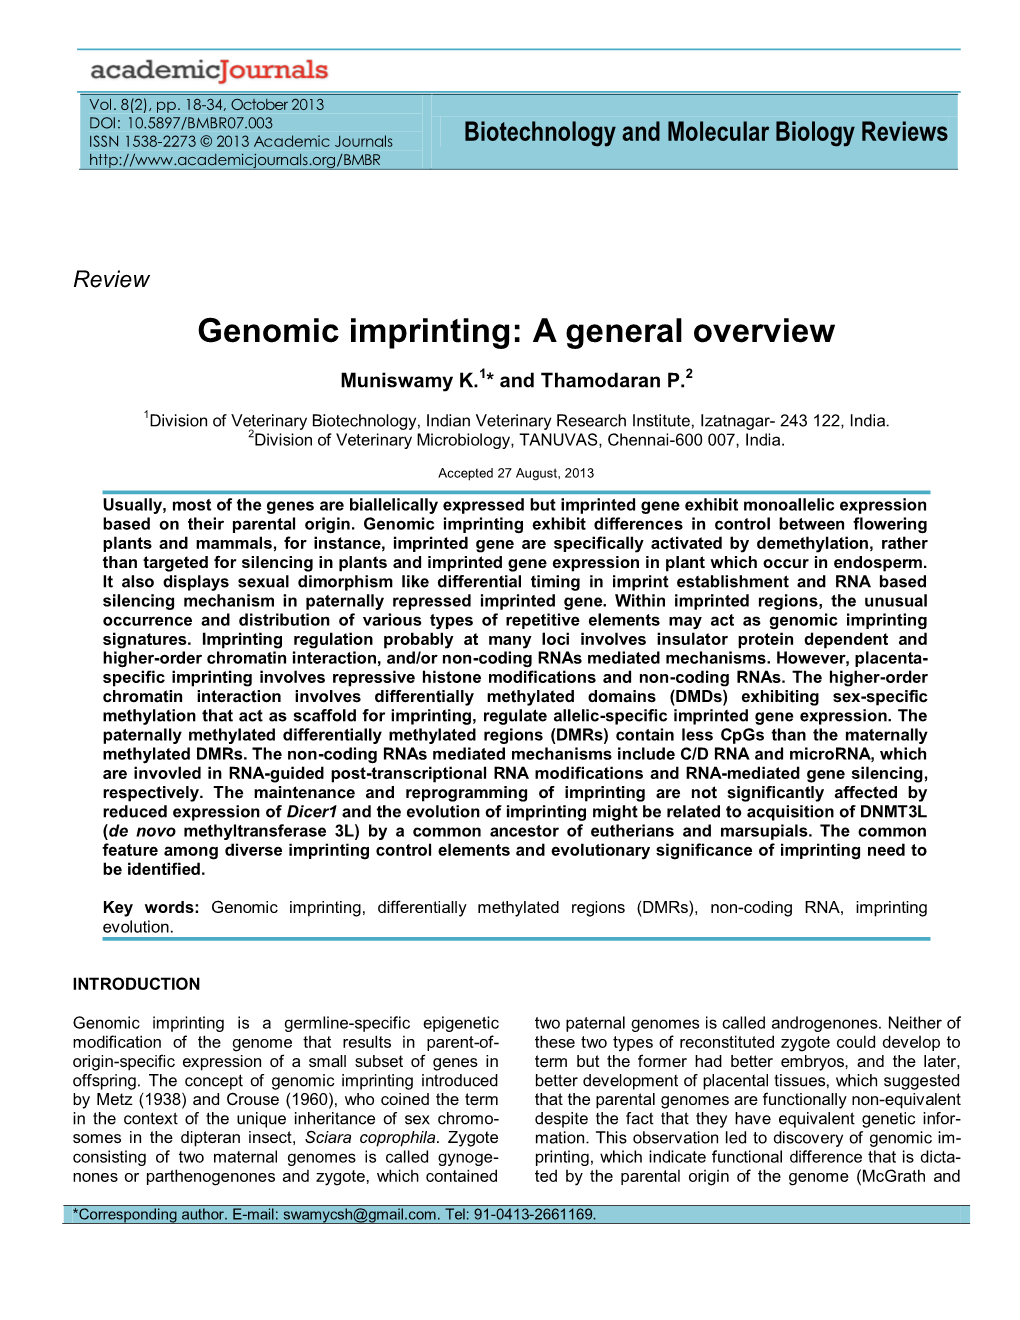 Genomic Imprinting : a General Overview